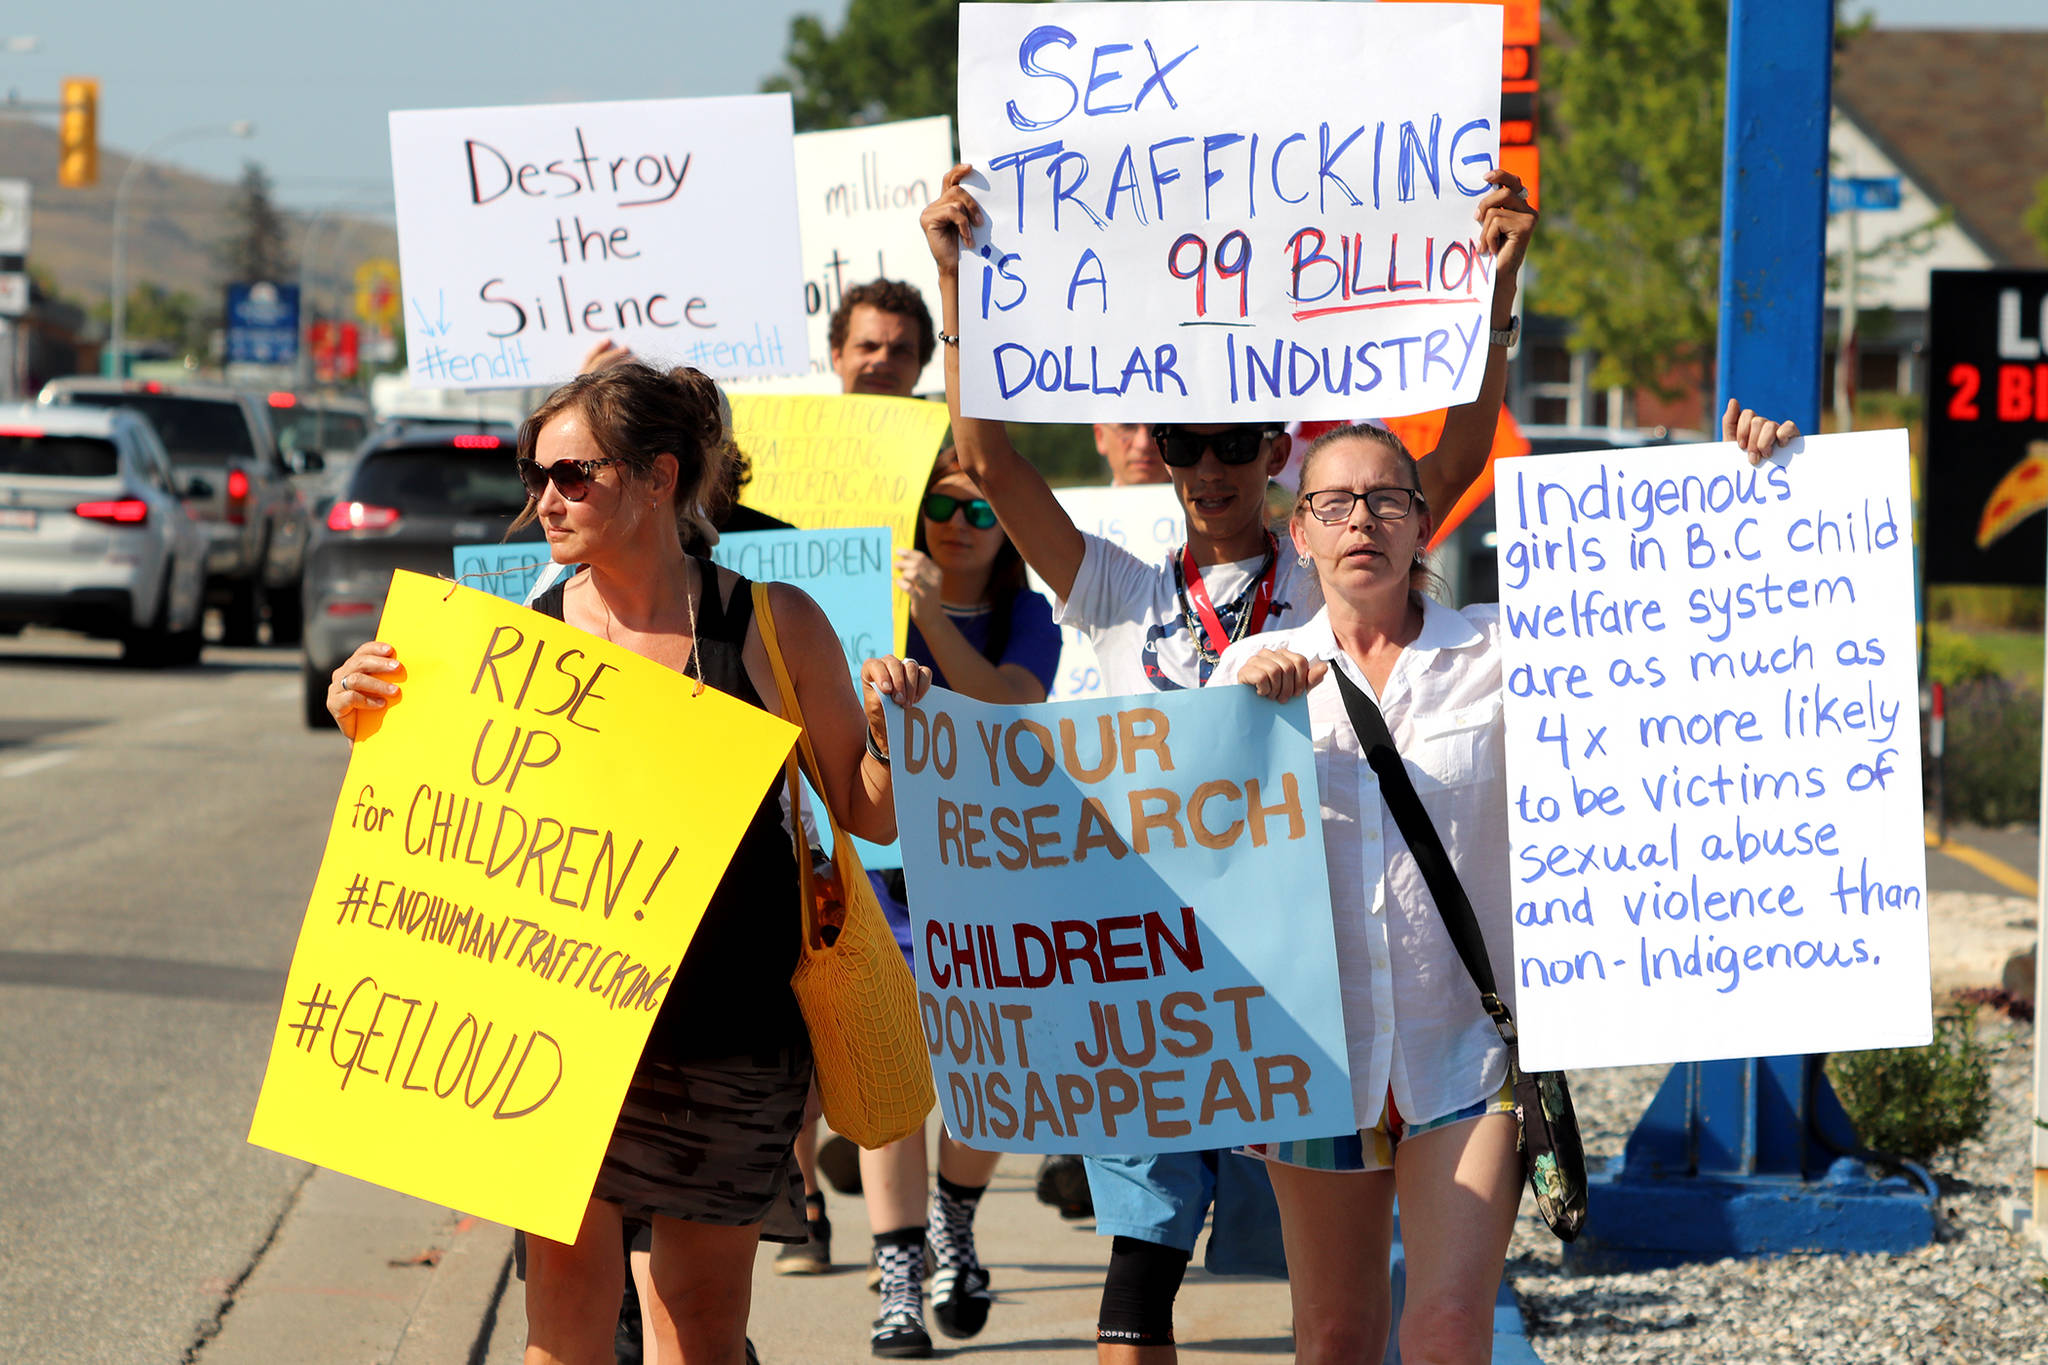 Heather Leggett (right) joined close to 20 people to march along 32nd Street in the intense heat Thursday, July 30 to raise awareness around sex trafficking. (Jennifer Smith - Morning Star)